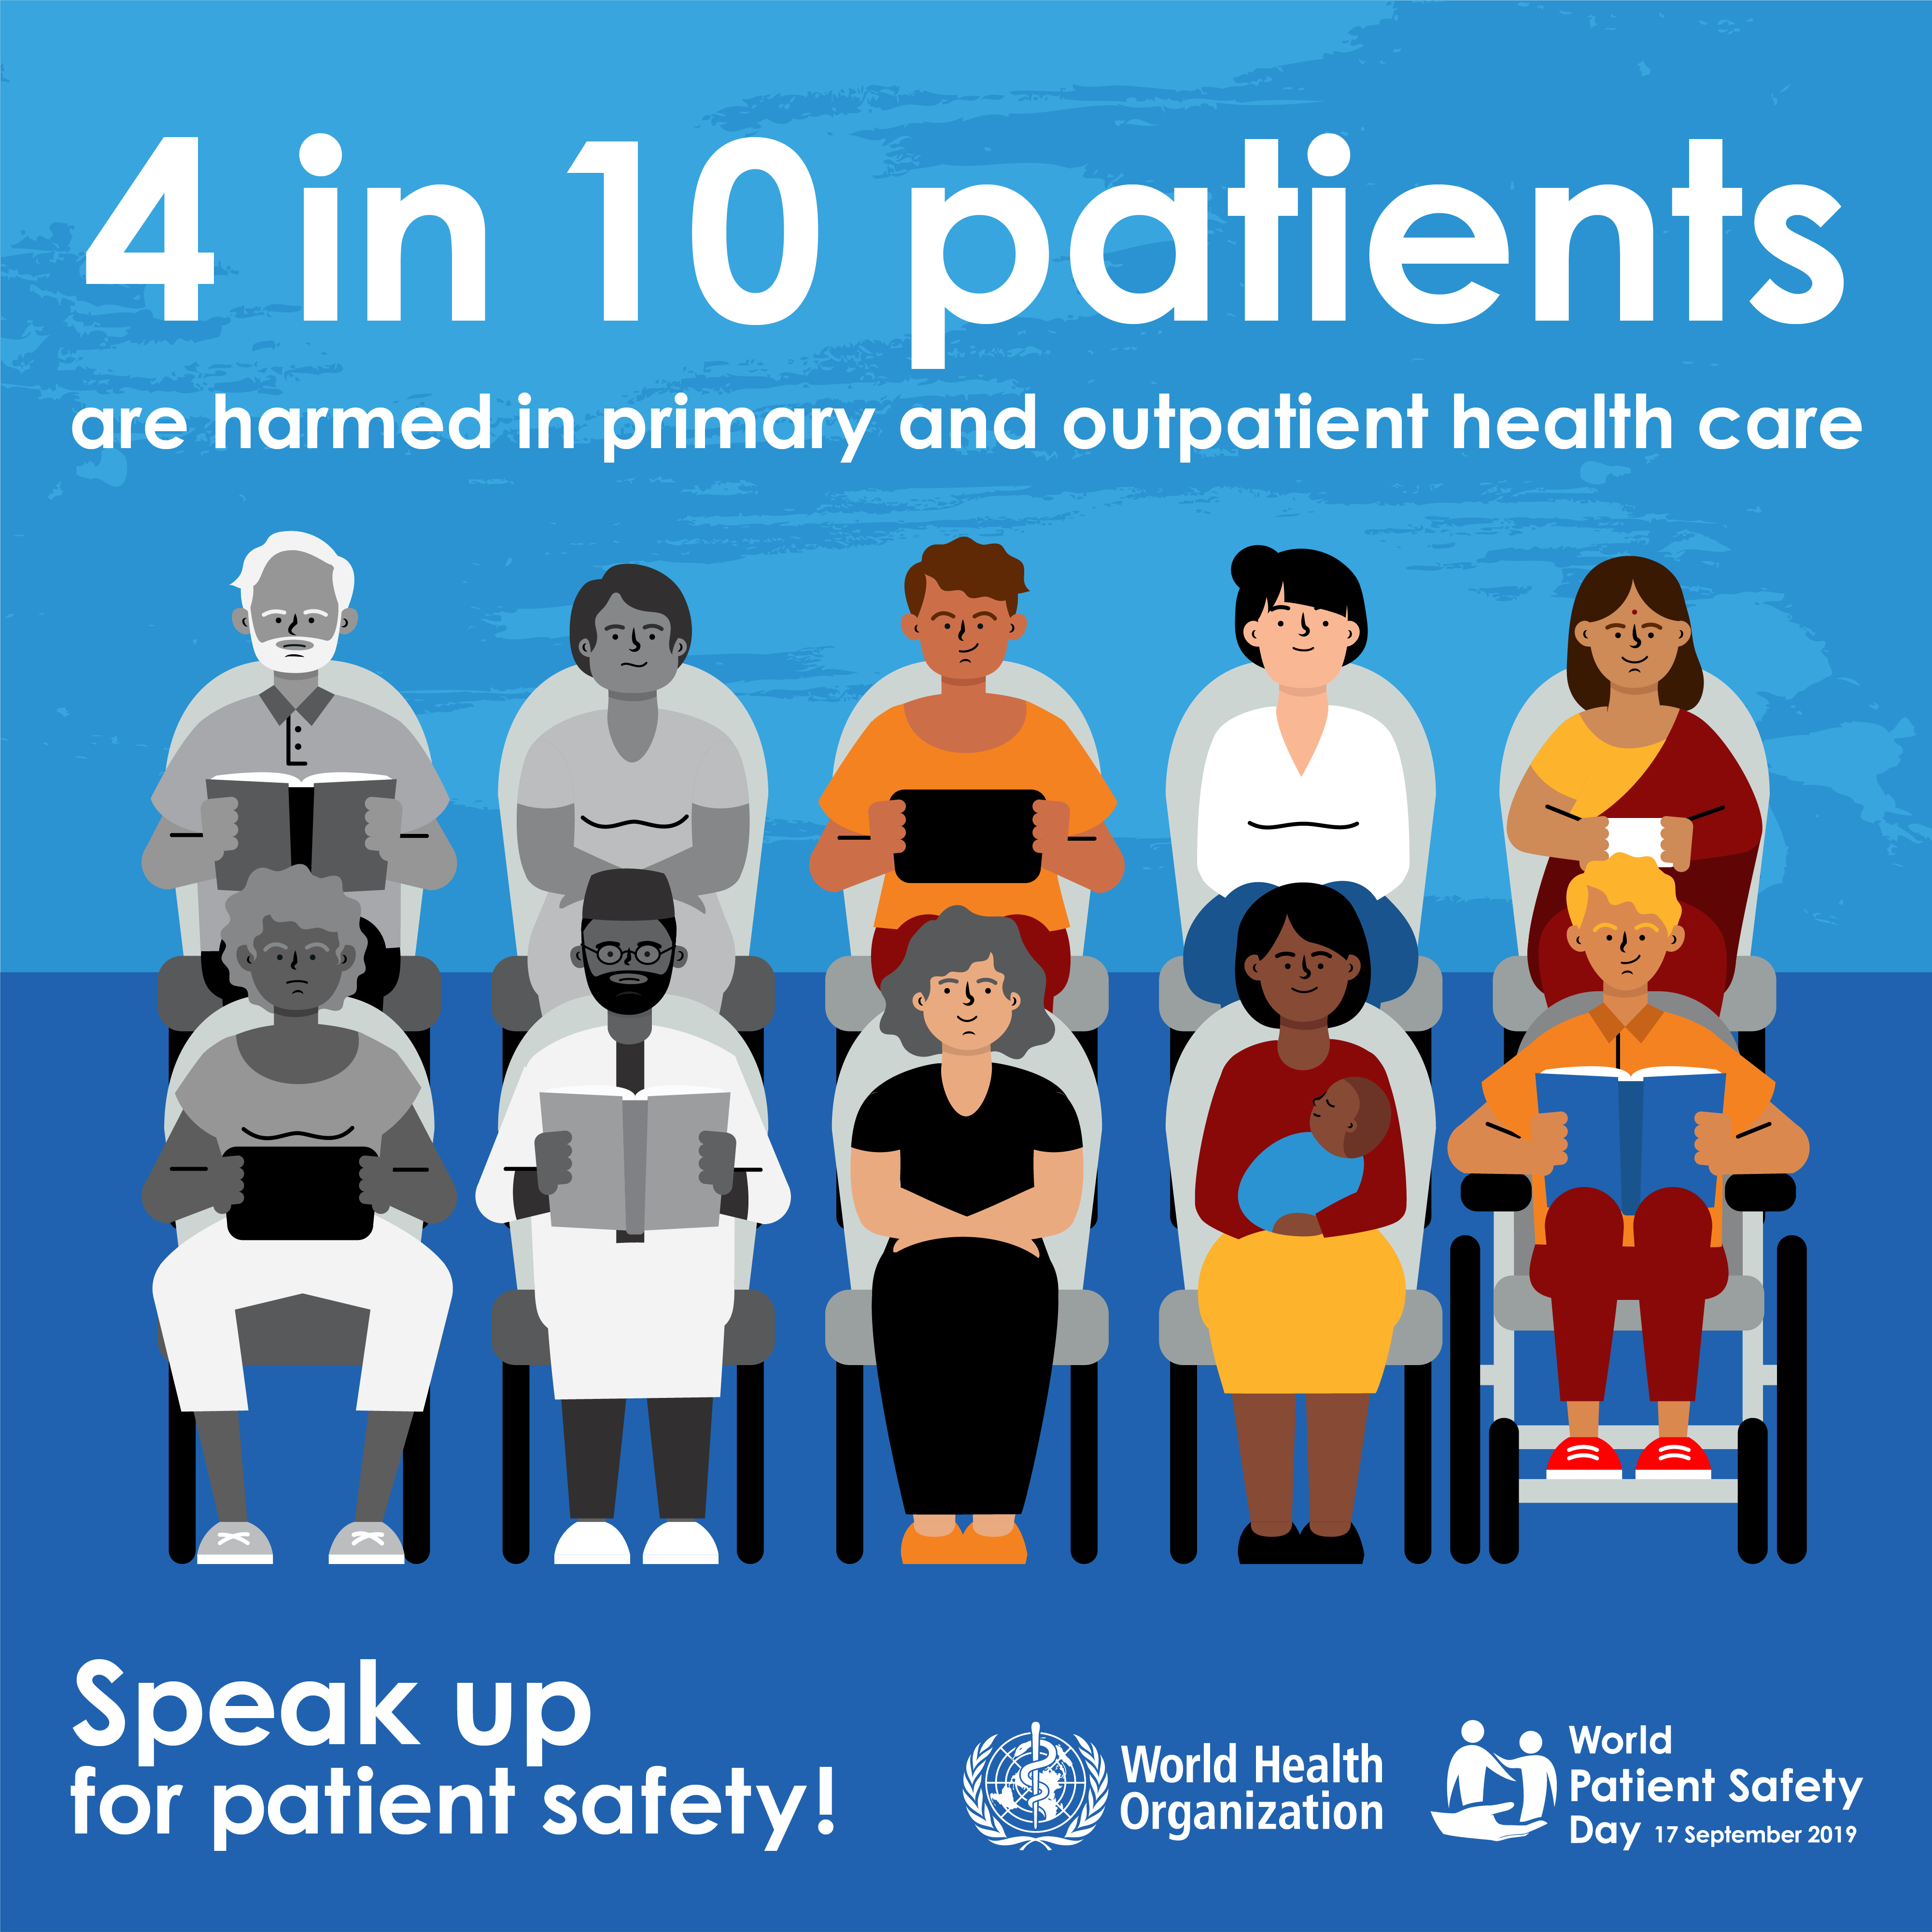 World Patient Safety Day – Speak up for patient safety.